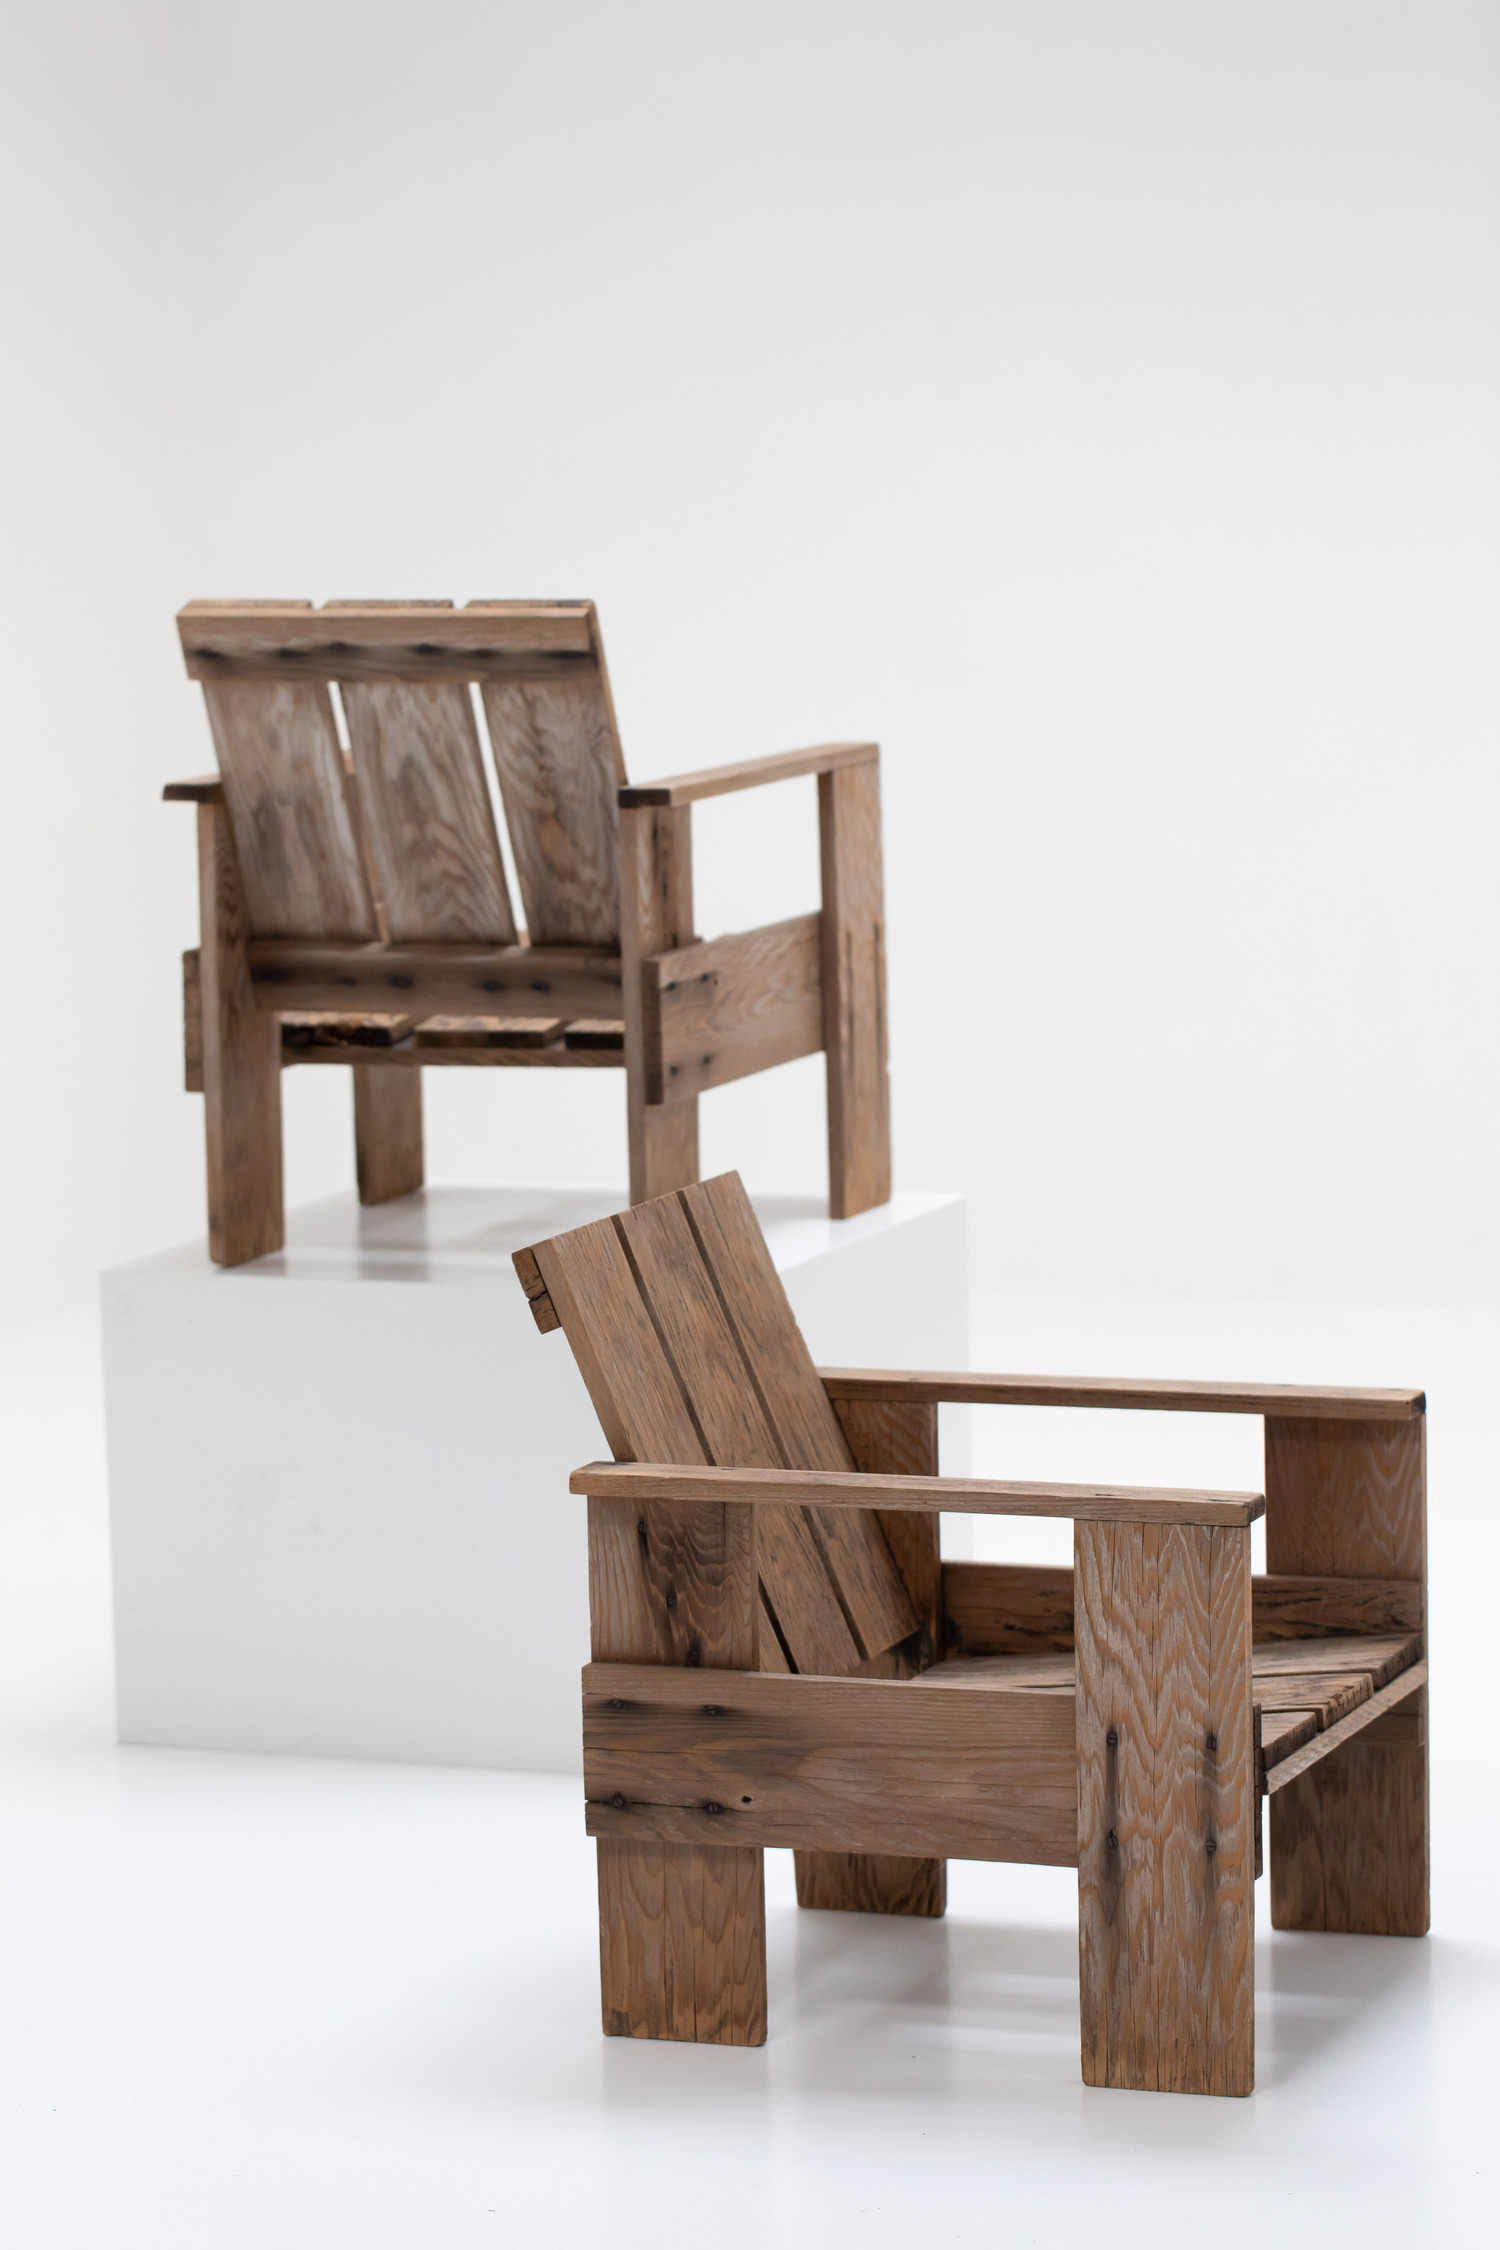 Crate chairs